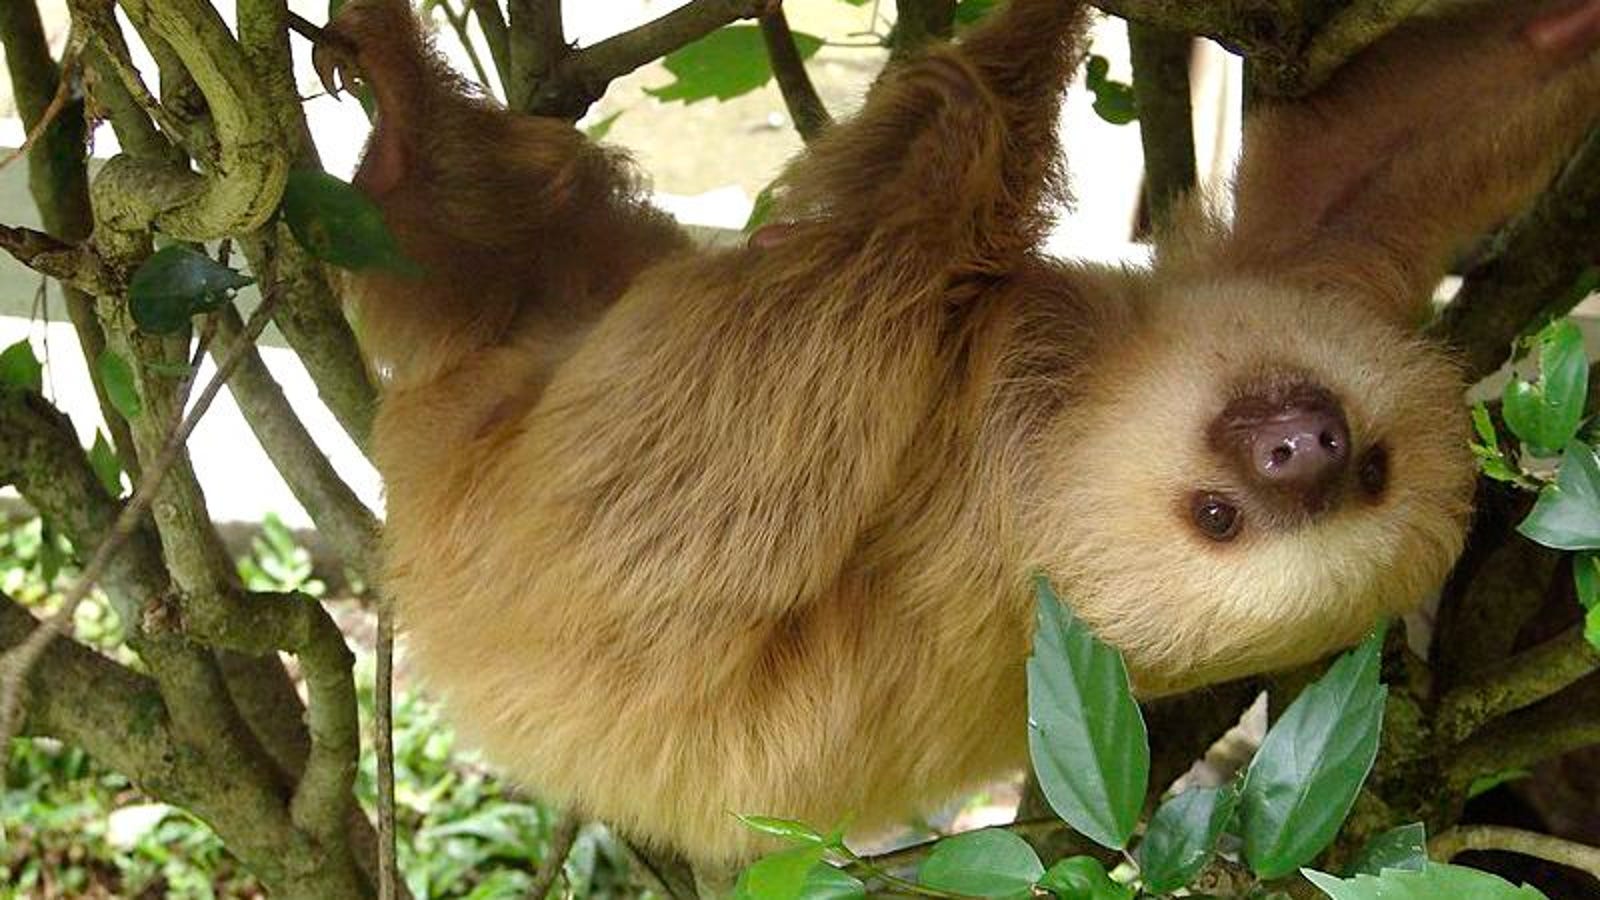 8 Female Sloths That We Bet Male Sloths Would Find Pretty Attractive